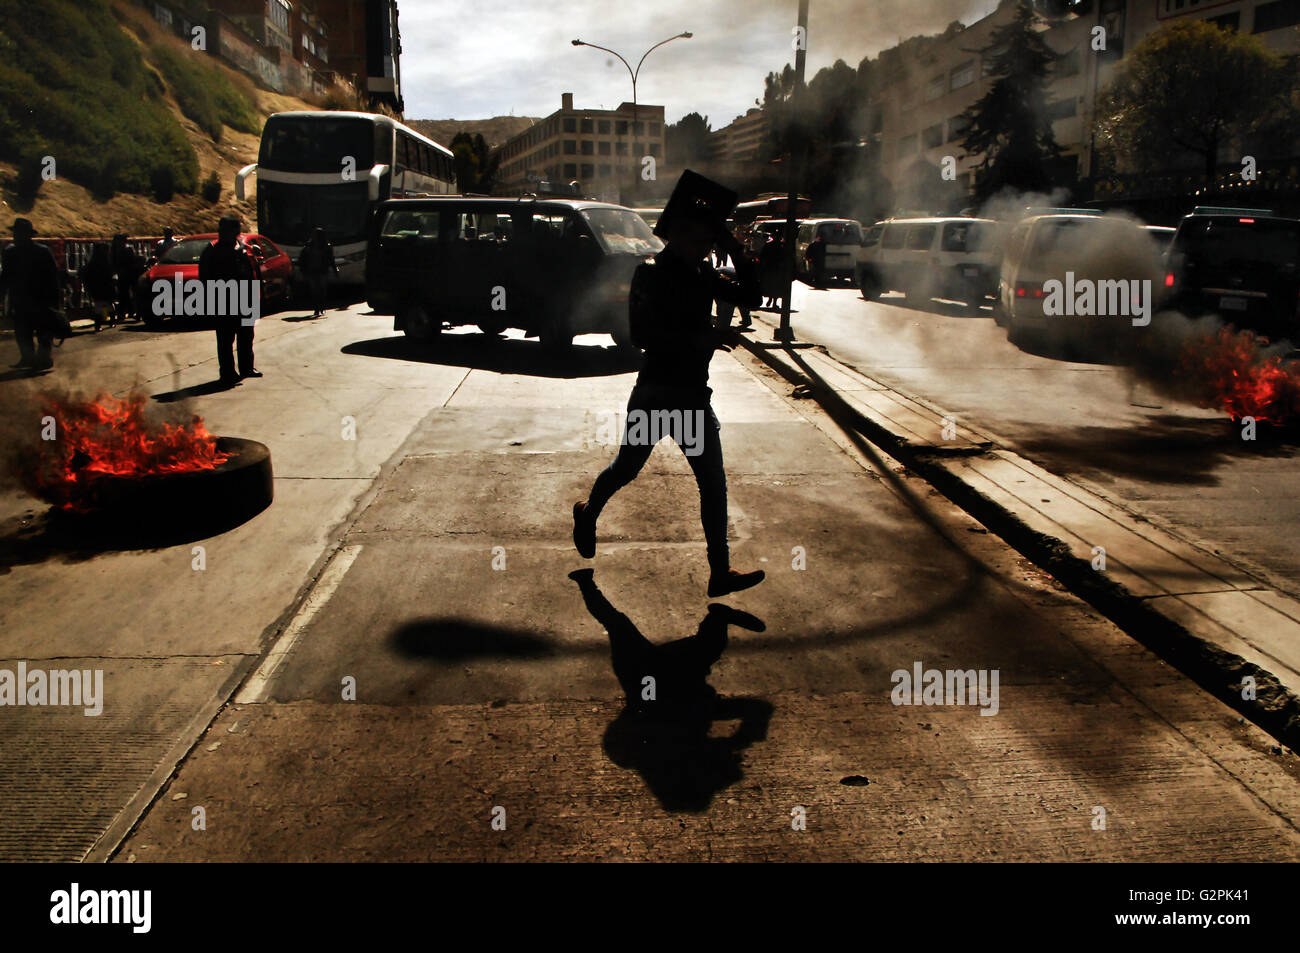 June 1, 2016 - La Paz, La Paz, Bolivia - People run away from protests in La Paz, Bolivai. Textile workers get to the La Paz city streets to protest against Evo Morales's government and his recent decision to get last ENATEX.SA public textile industry closed, as firing the all personal.Enatex was Ametex untill 2012, exporting clothes to the U.S for trademarks as Ralph Lauren, Hilfiger, and others. After failling in war on drugs U.S plans, Bolivia loose in 2008 her possibility to export with preferences and in 2012 the government buy and reduce it to export textiles to Venezuela new allies, sup Stock Photo